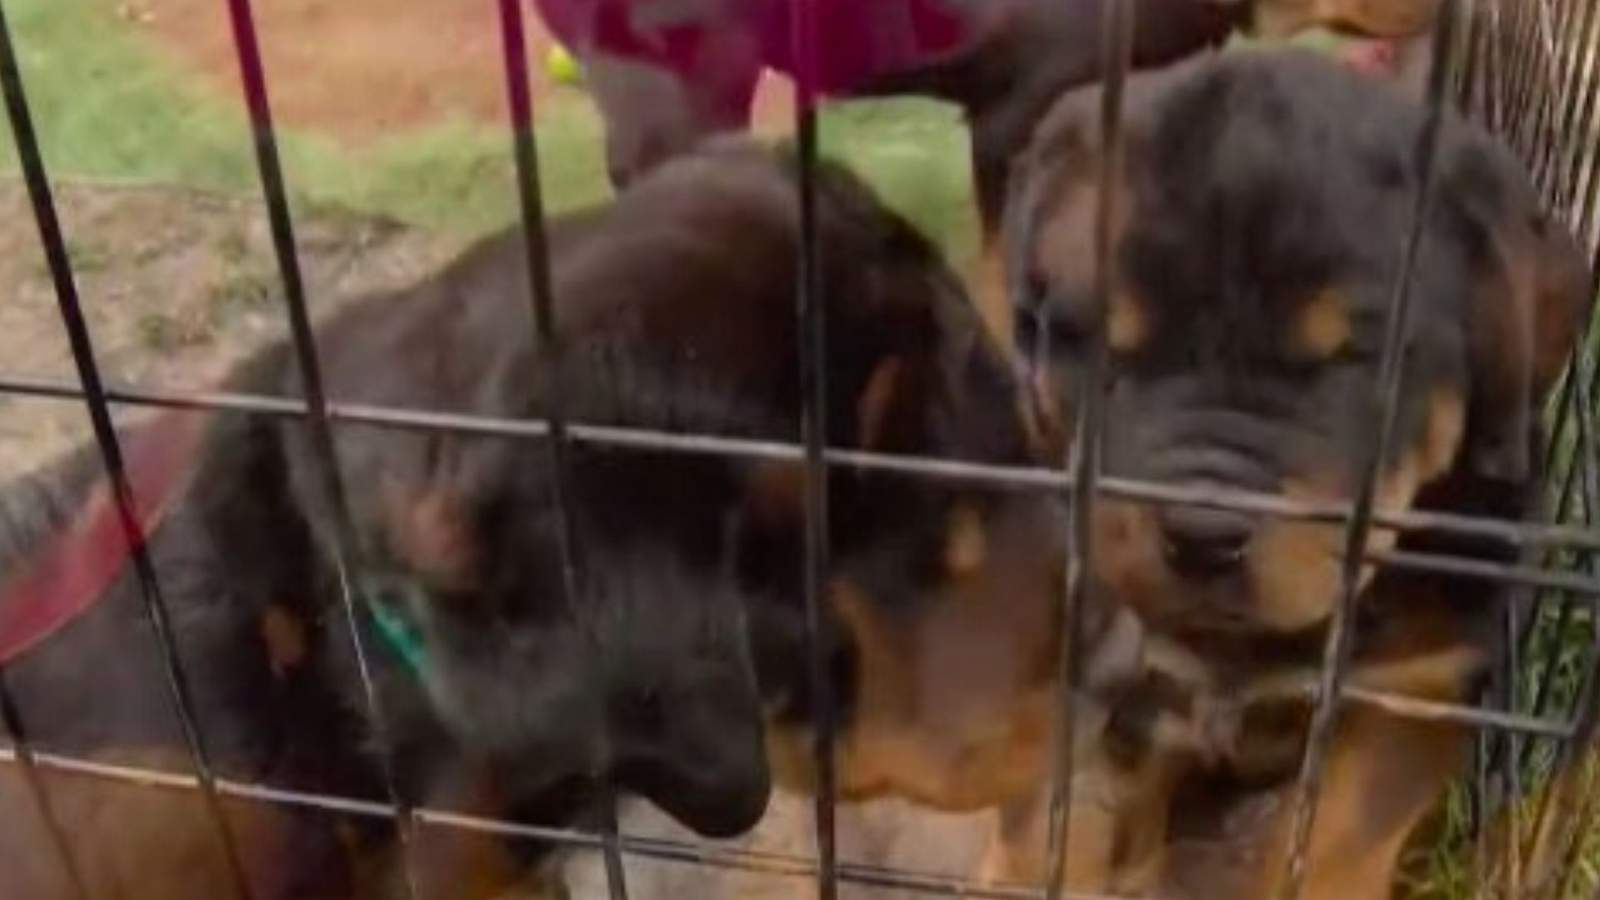 Better Business Bureau warns of online puppy scams ahead of holidays